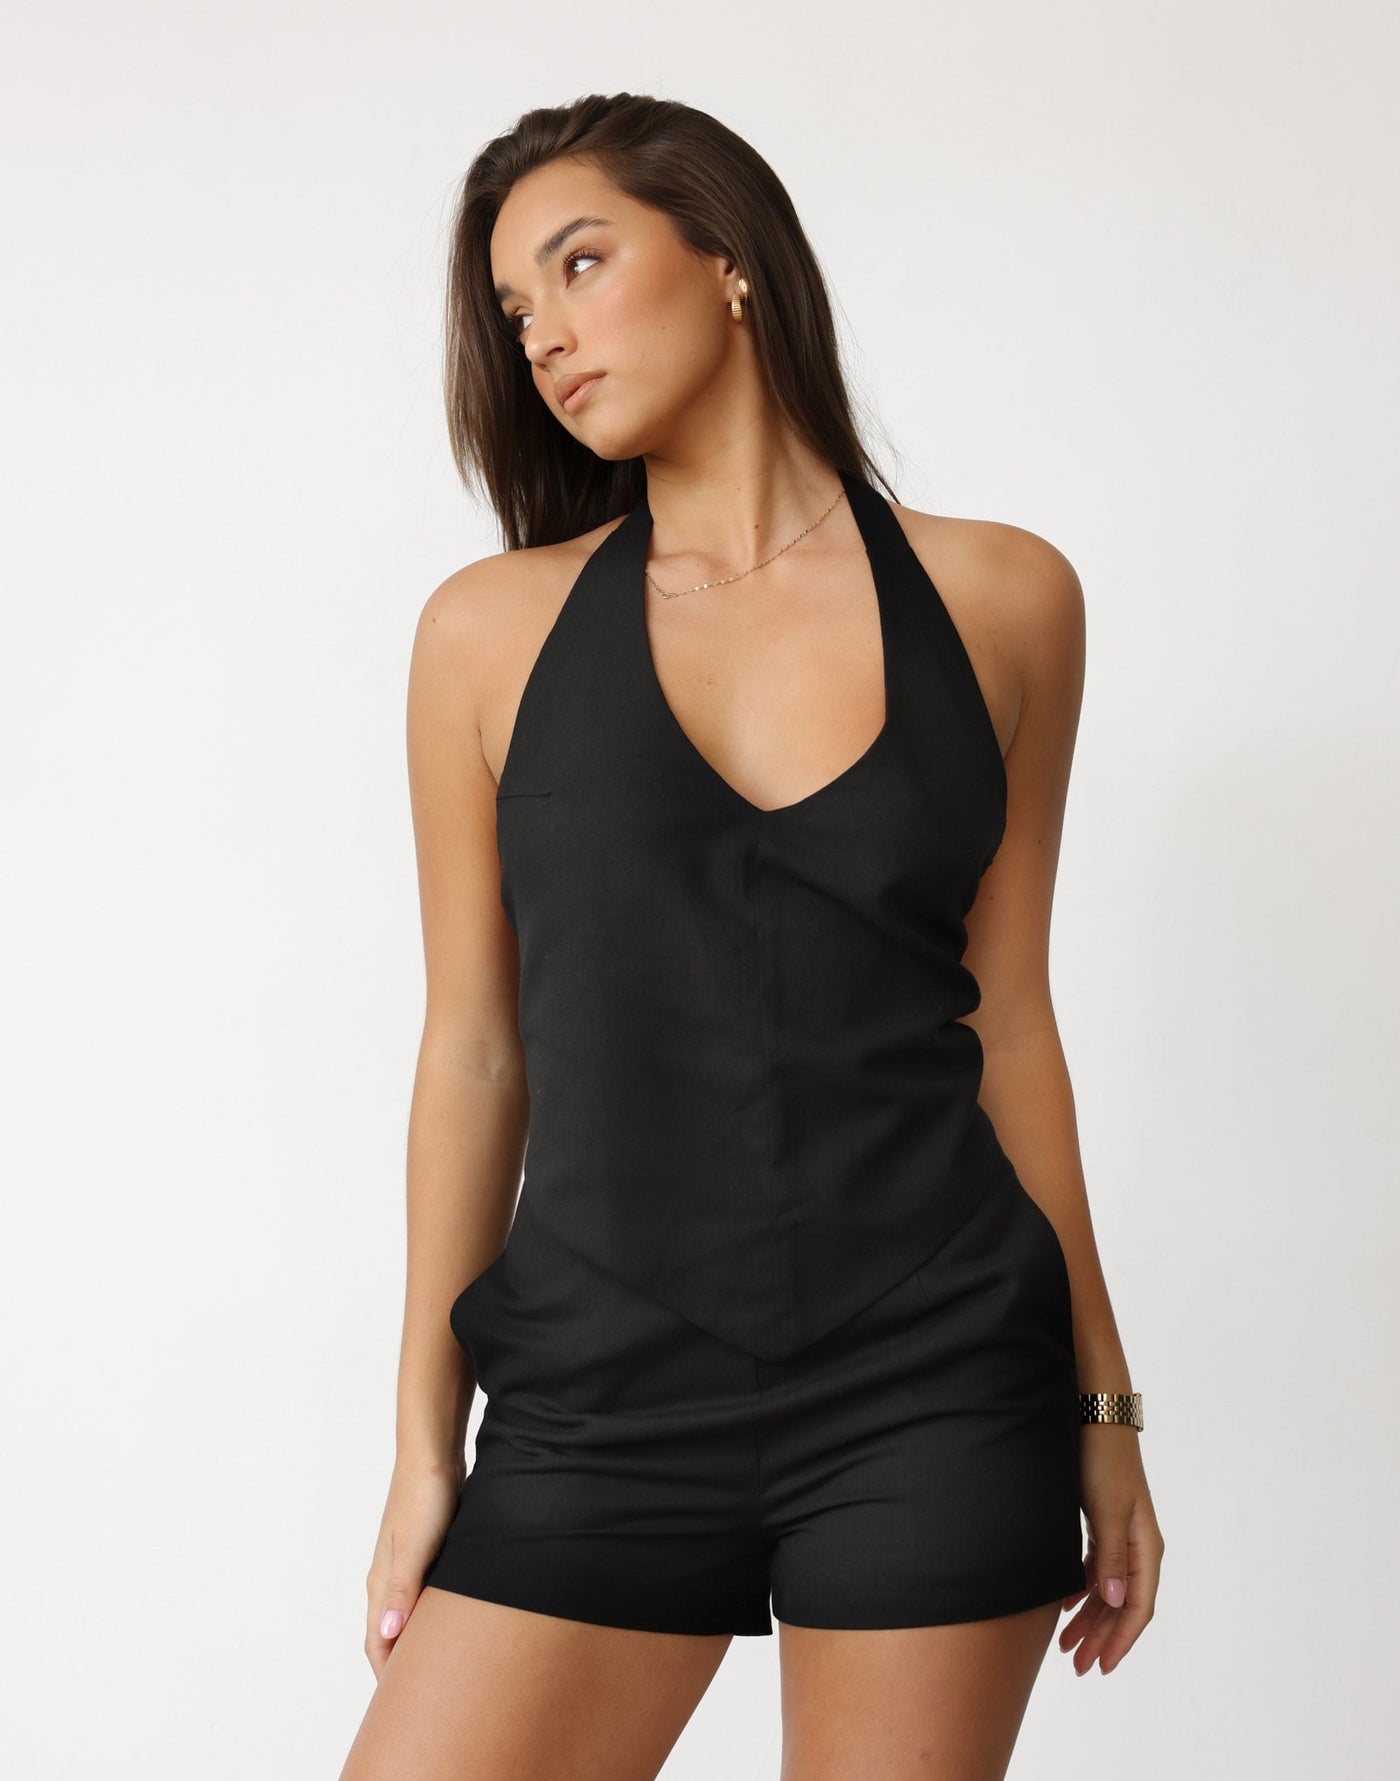 Grace Linen Top (Black) | CHARCOAL Exclusive - V Neck Tie Up Neck and Back V Neck Top - Women's Top - Charcoal Clothing